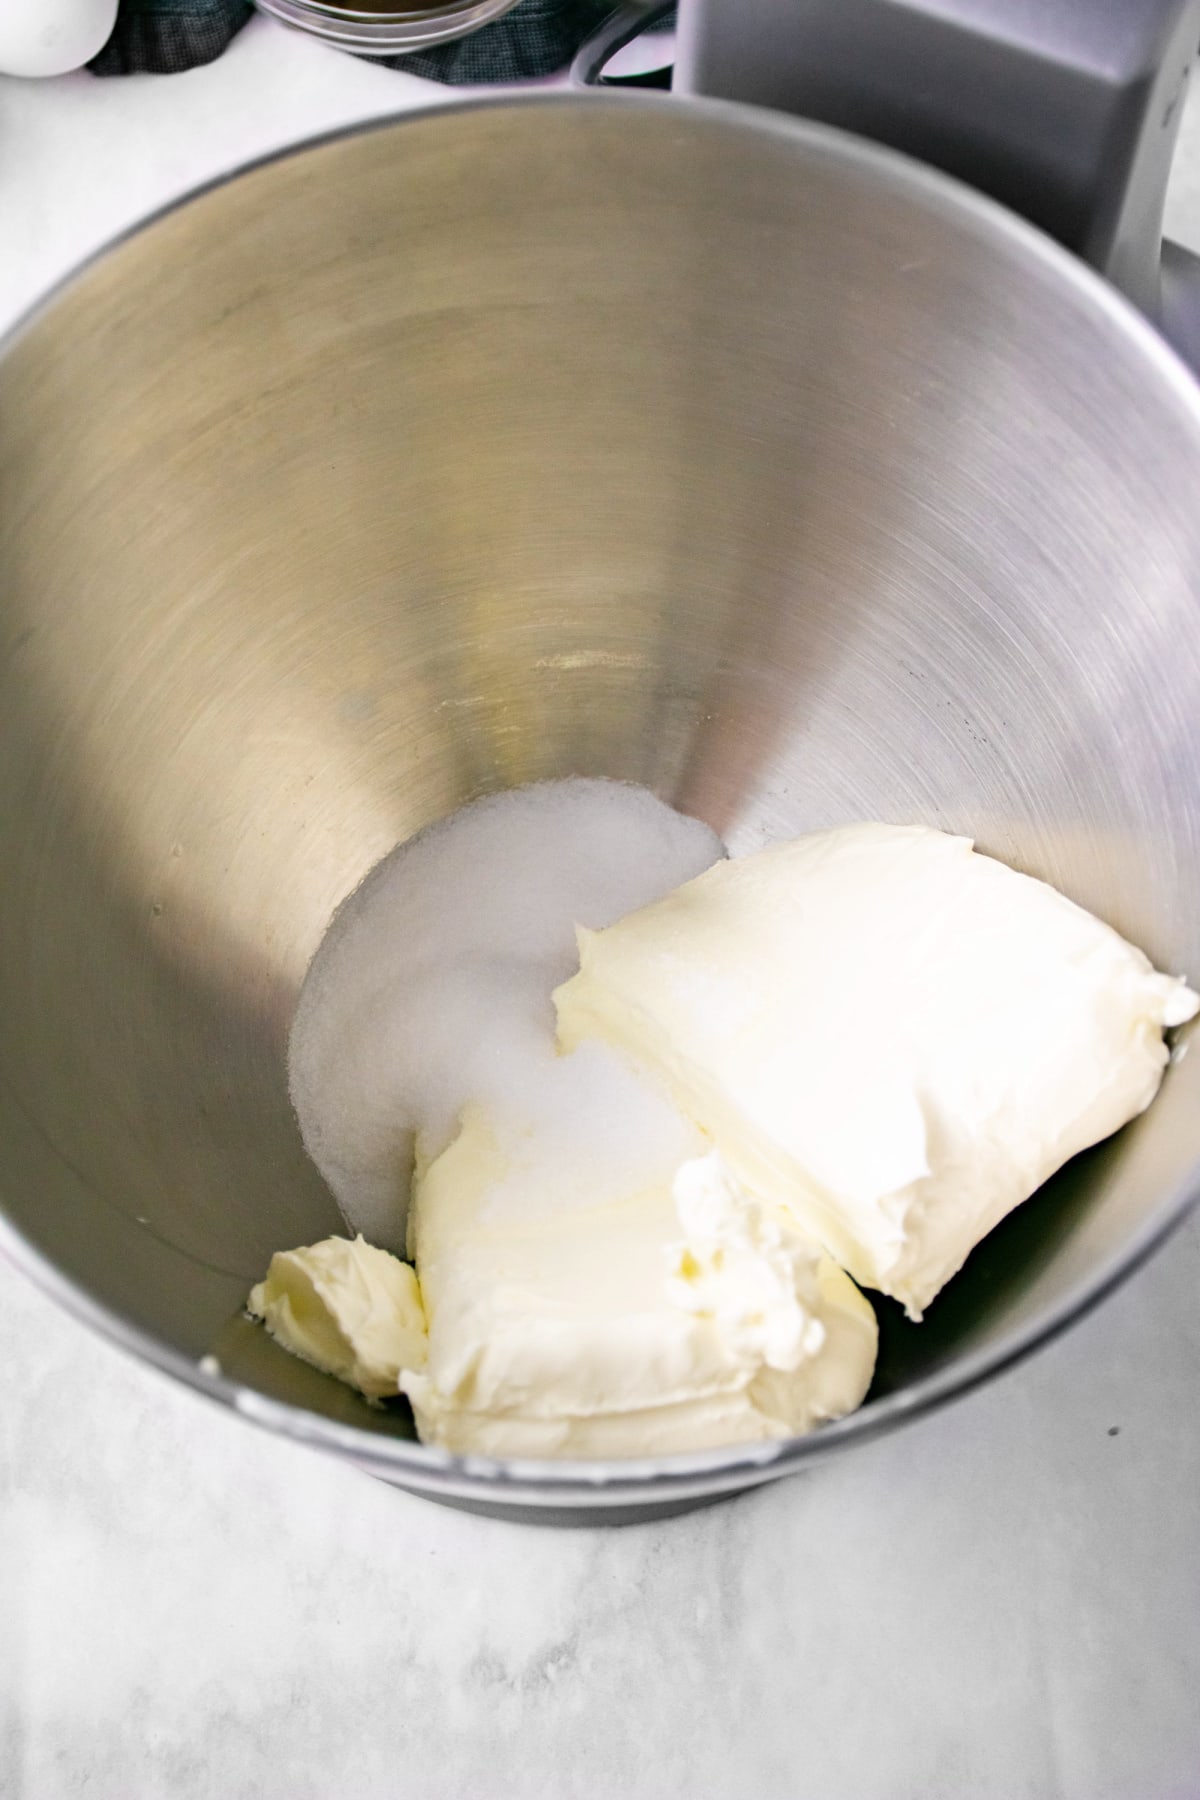 Cream cheese and sugar in bowl